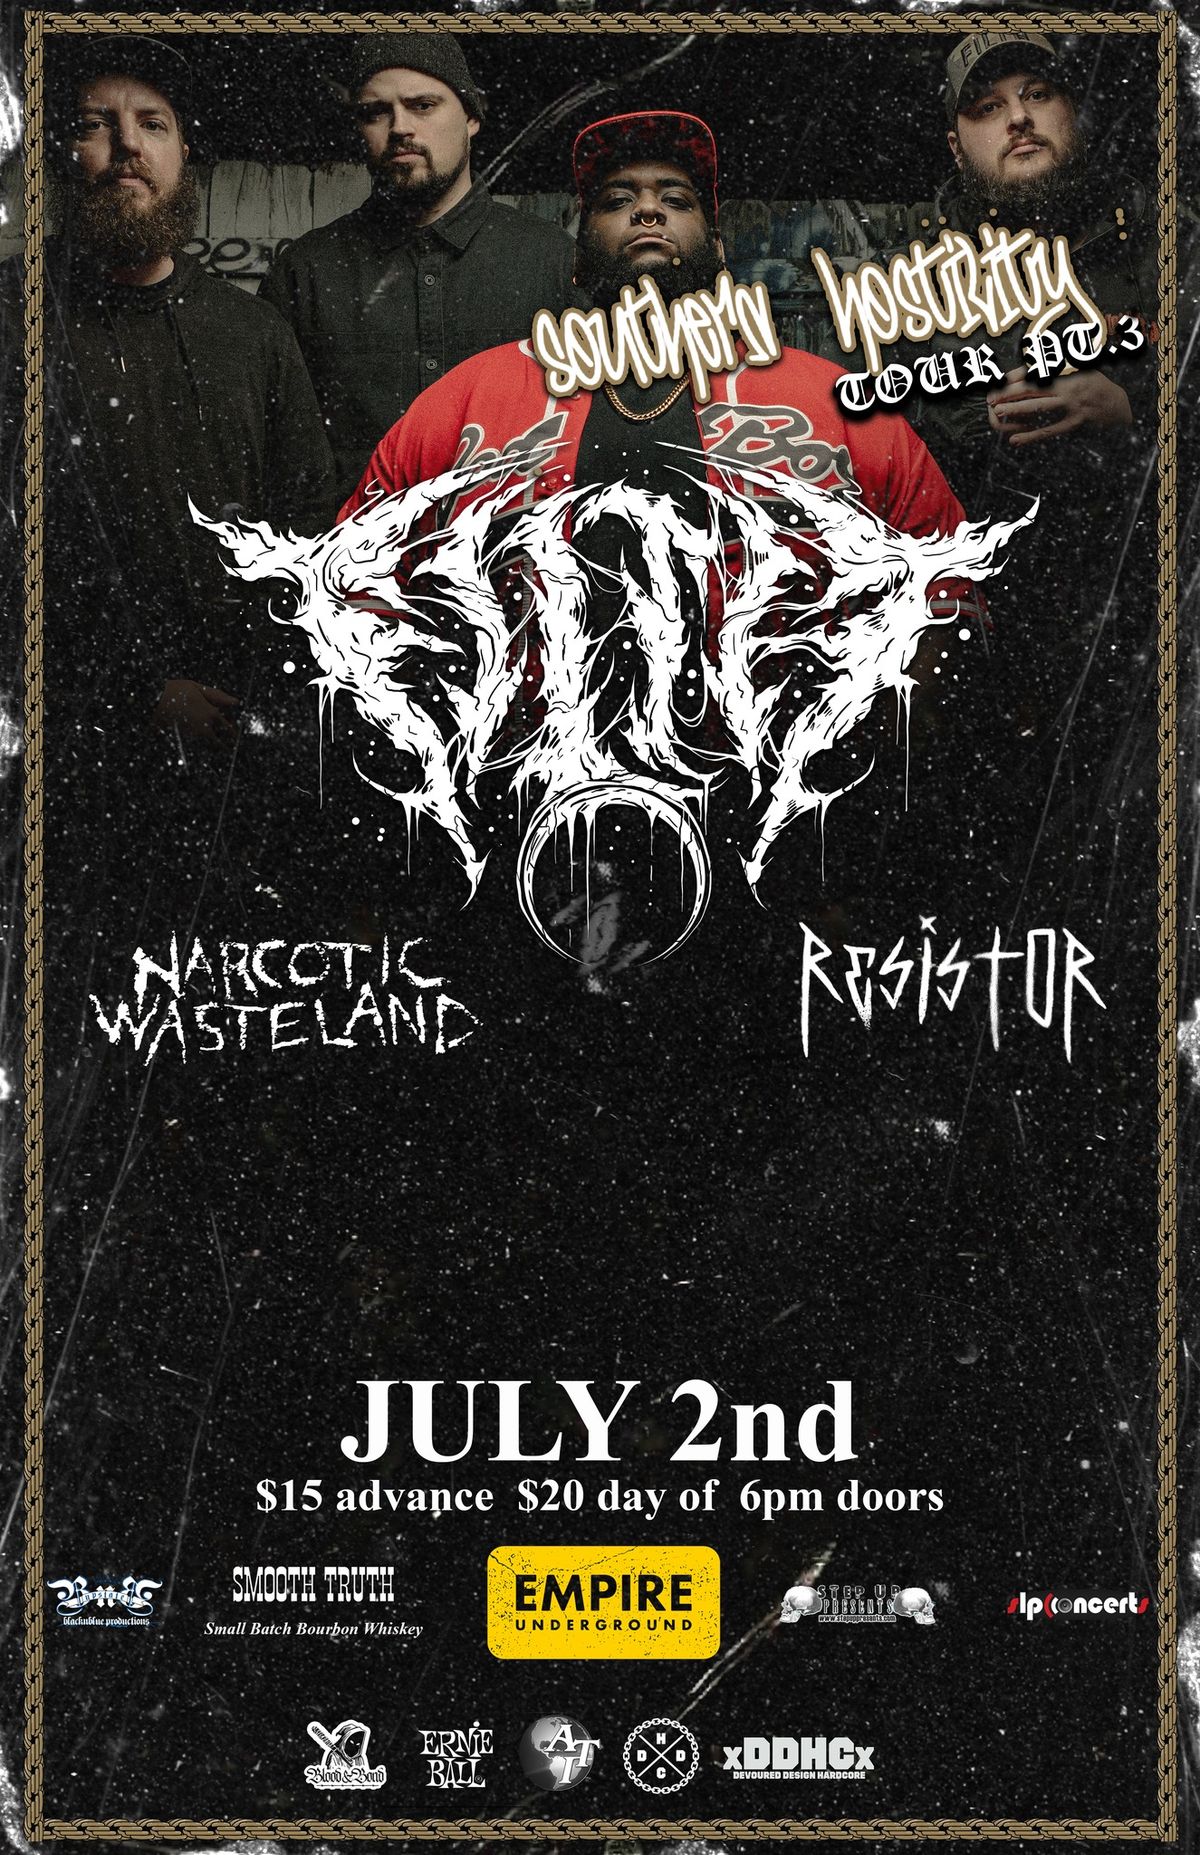 Filth, Narcotic Wasteland, Resistor and more TBA